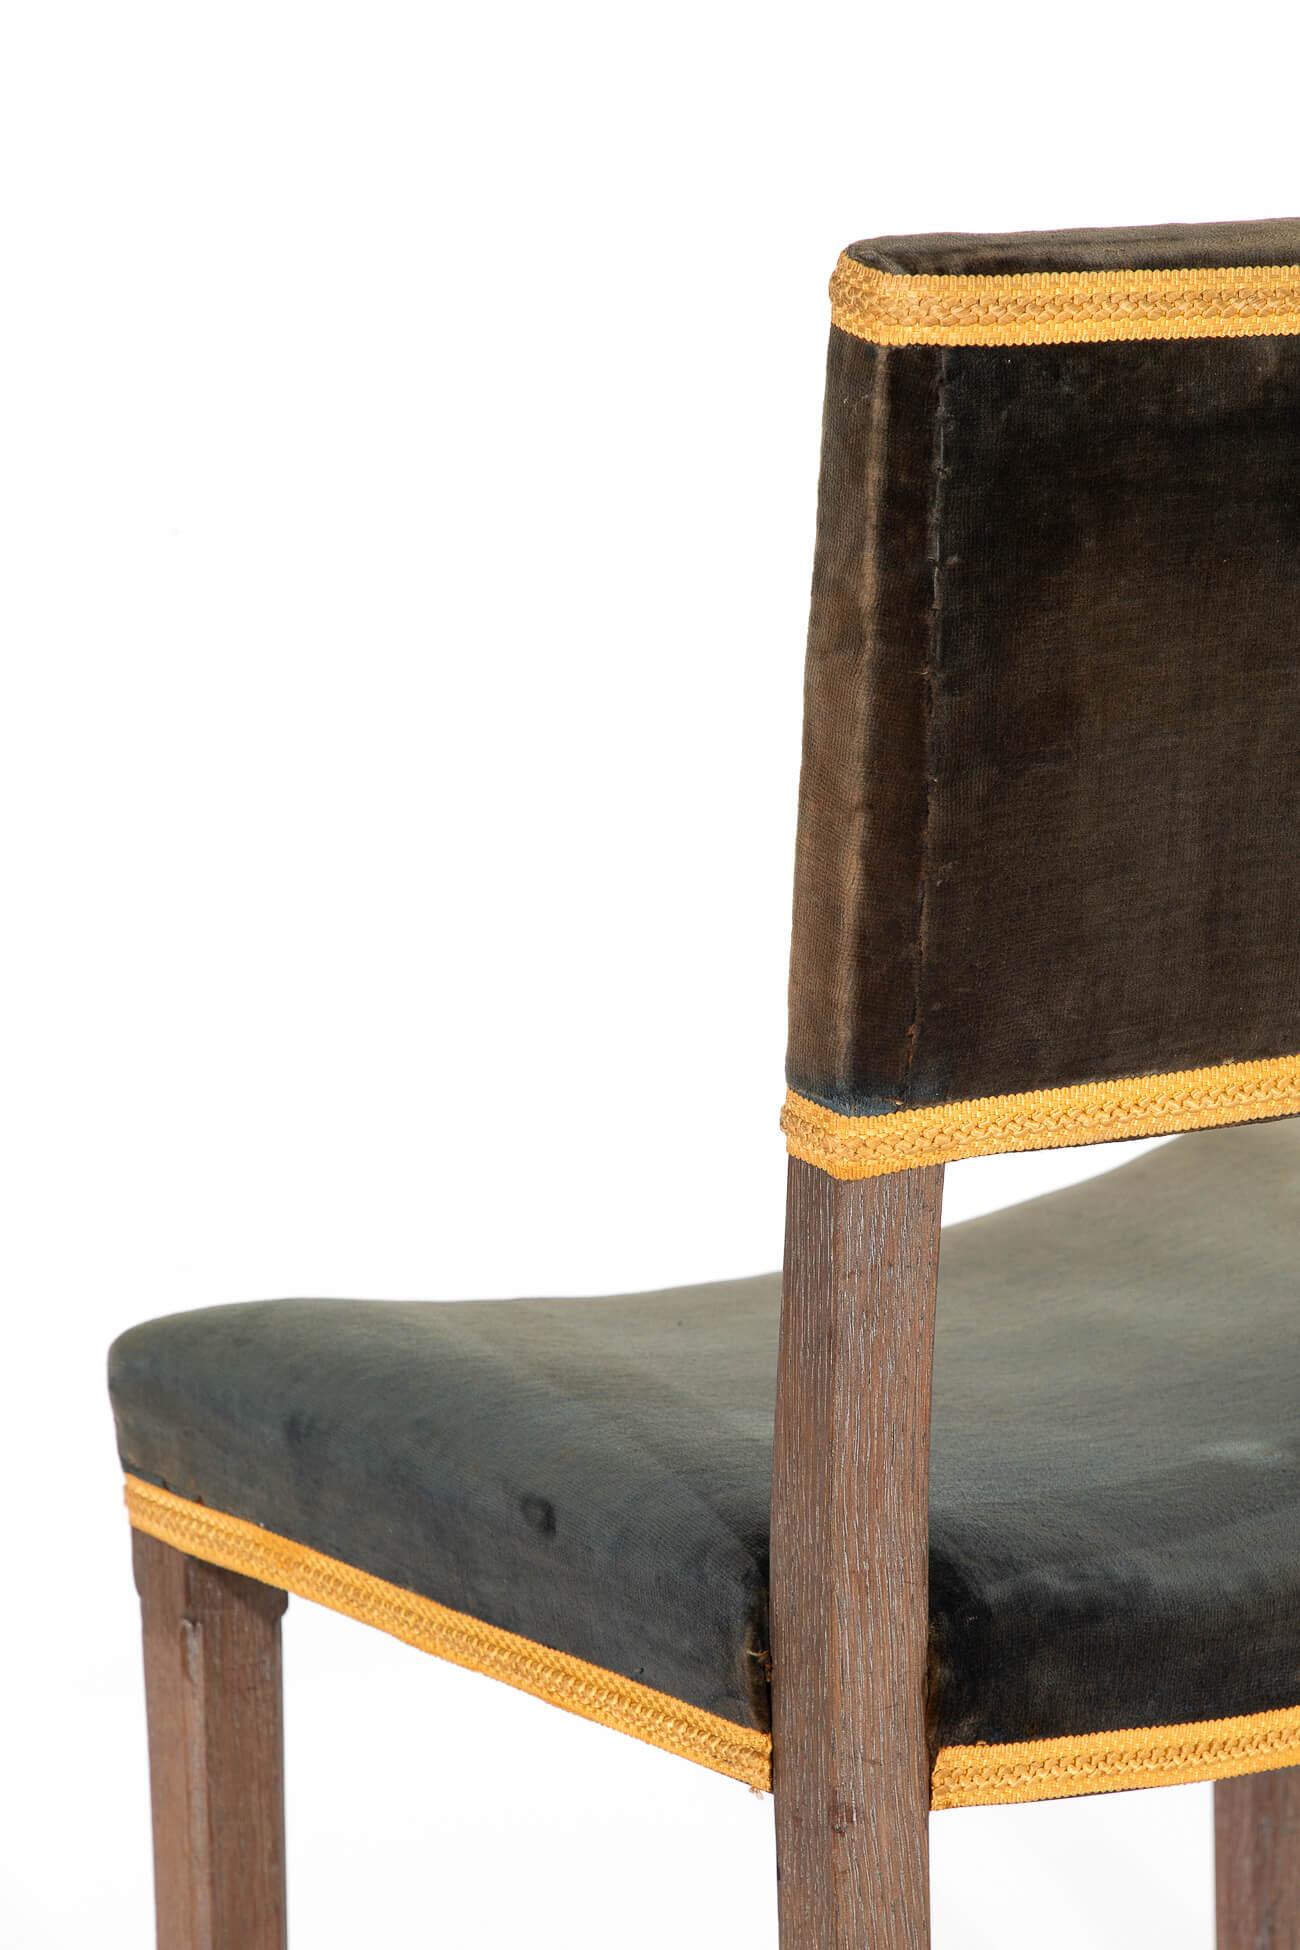 Velvet A George VI 1937 Coronation Chair and Stool For Sale